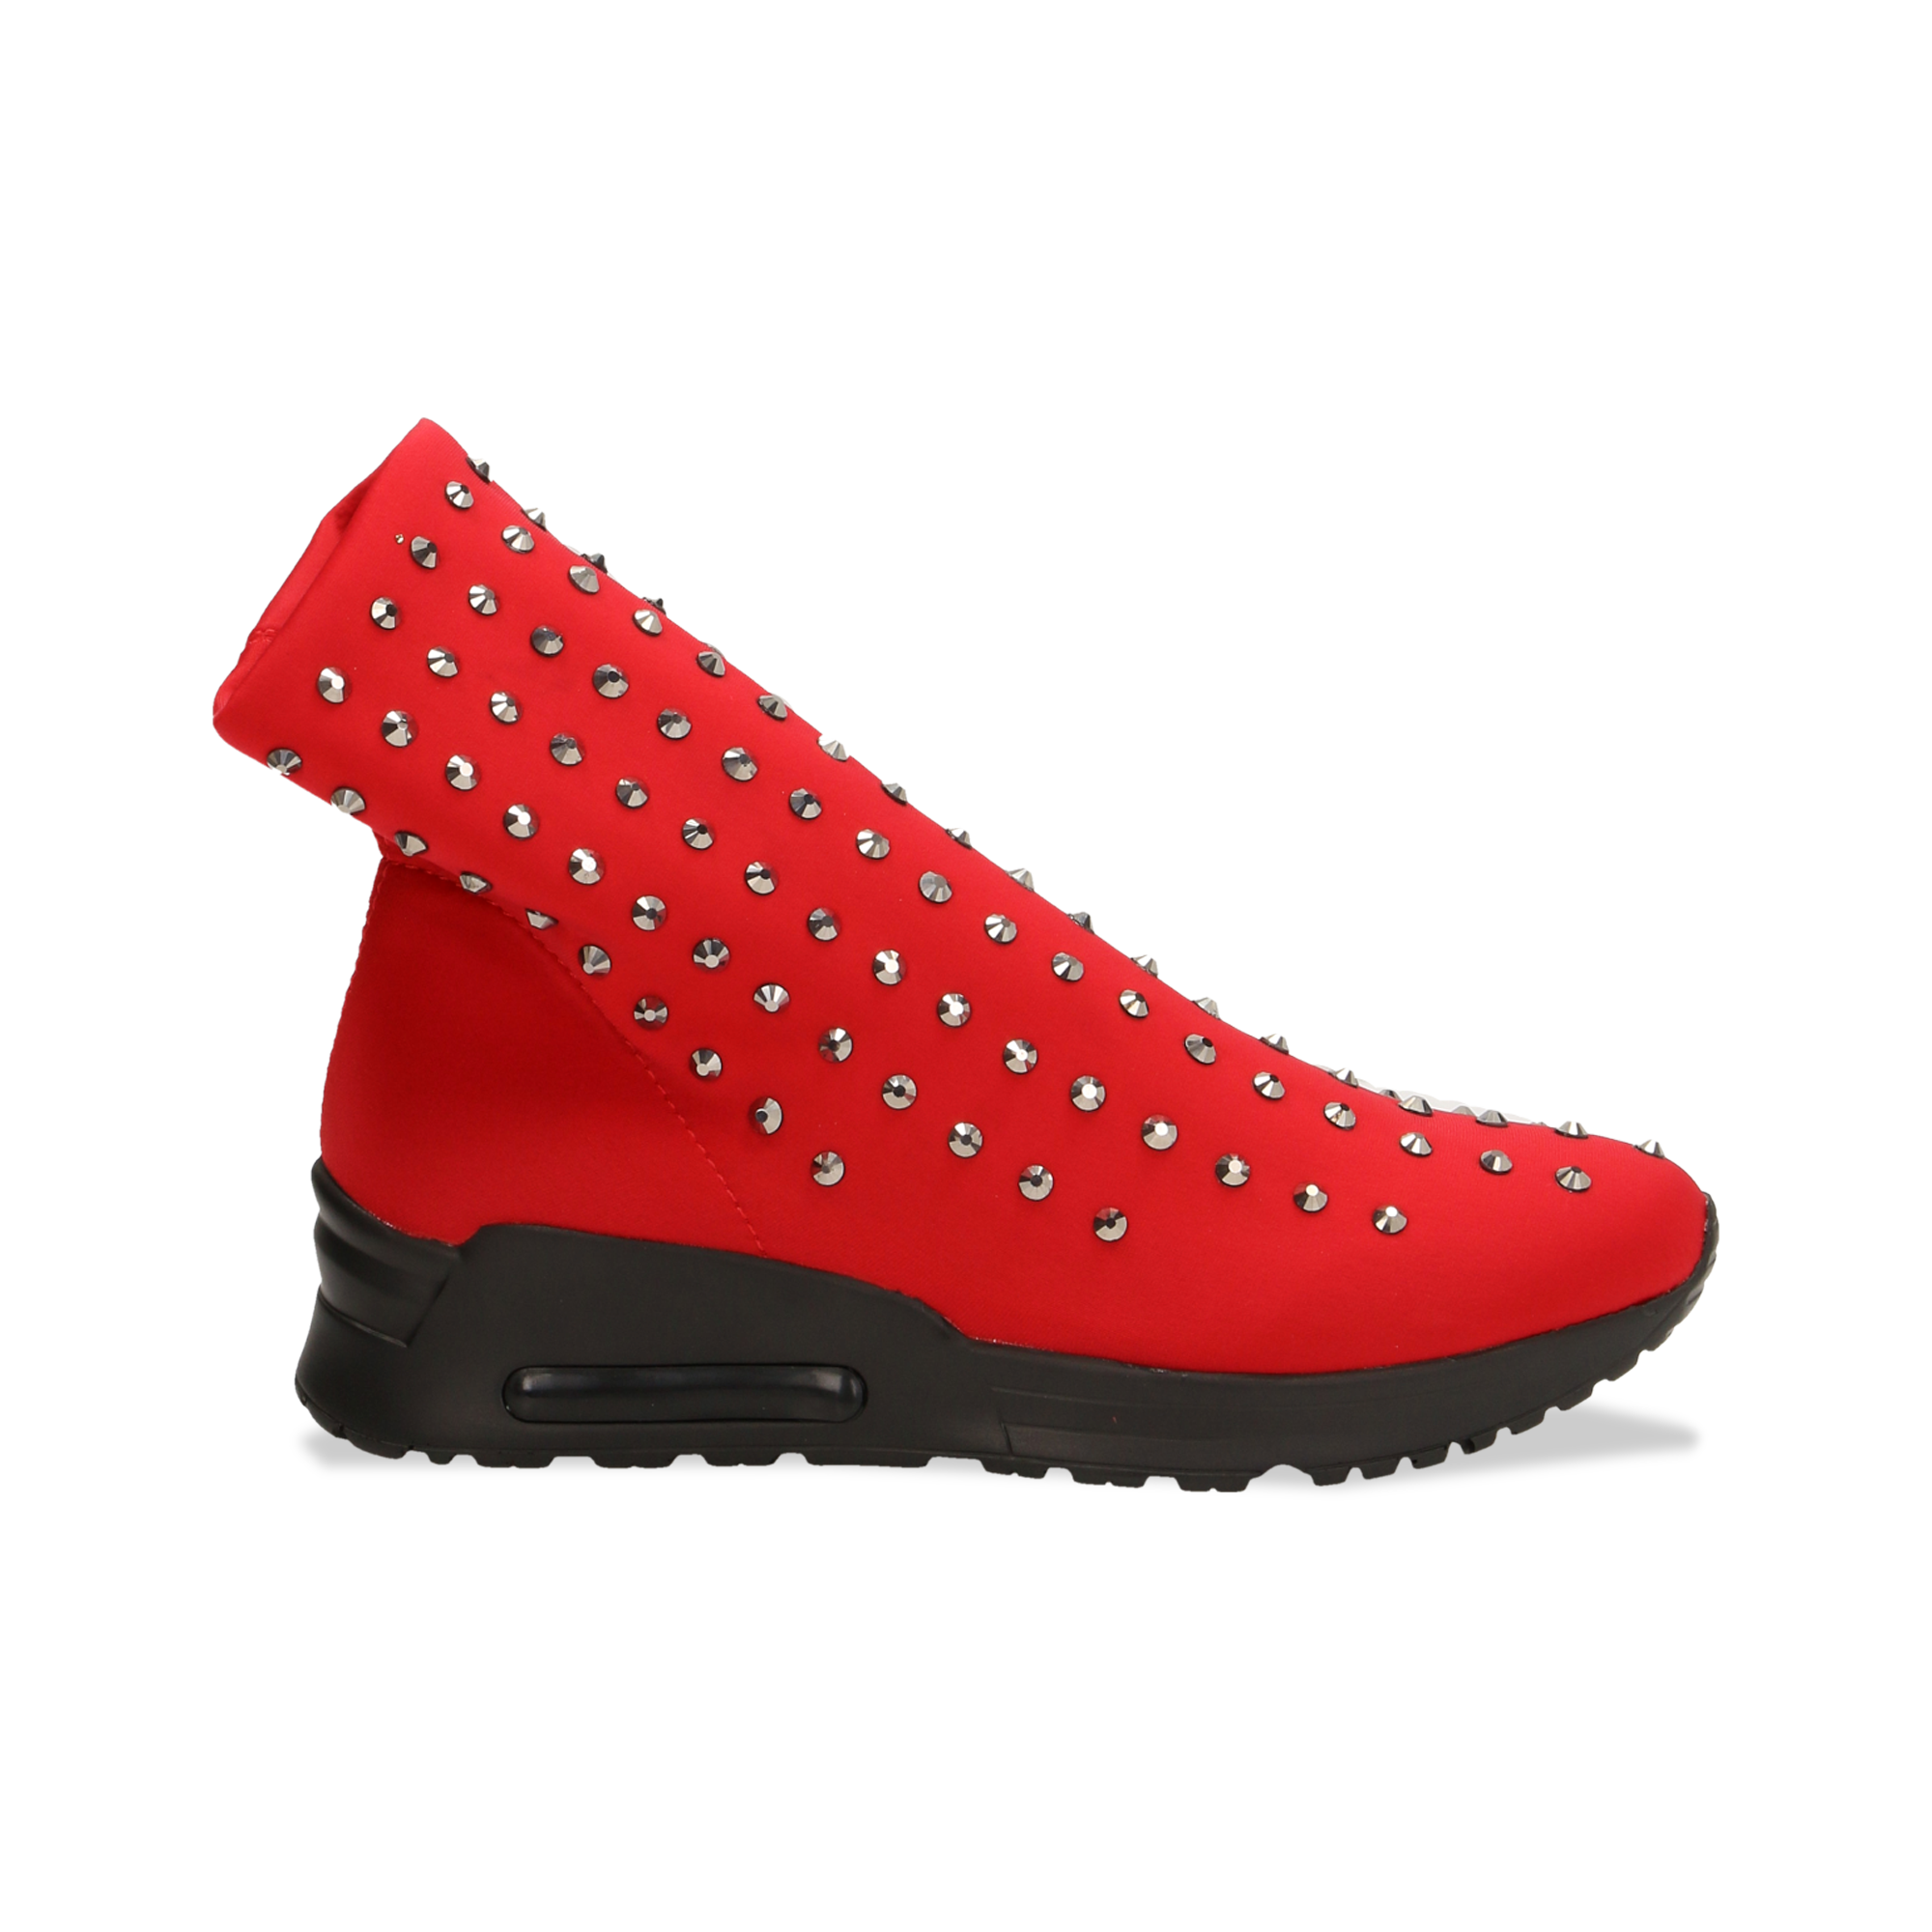 Sneakers Rosse Donna Tacco Basso - Cod. 122808611LYROSS | Primadonna  Collection